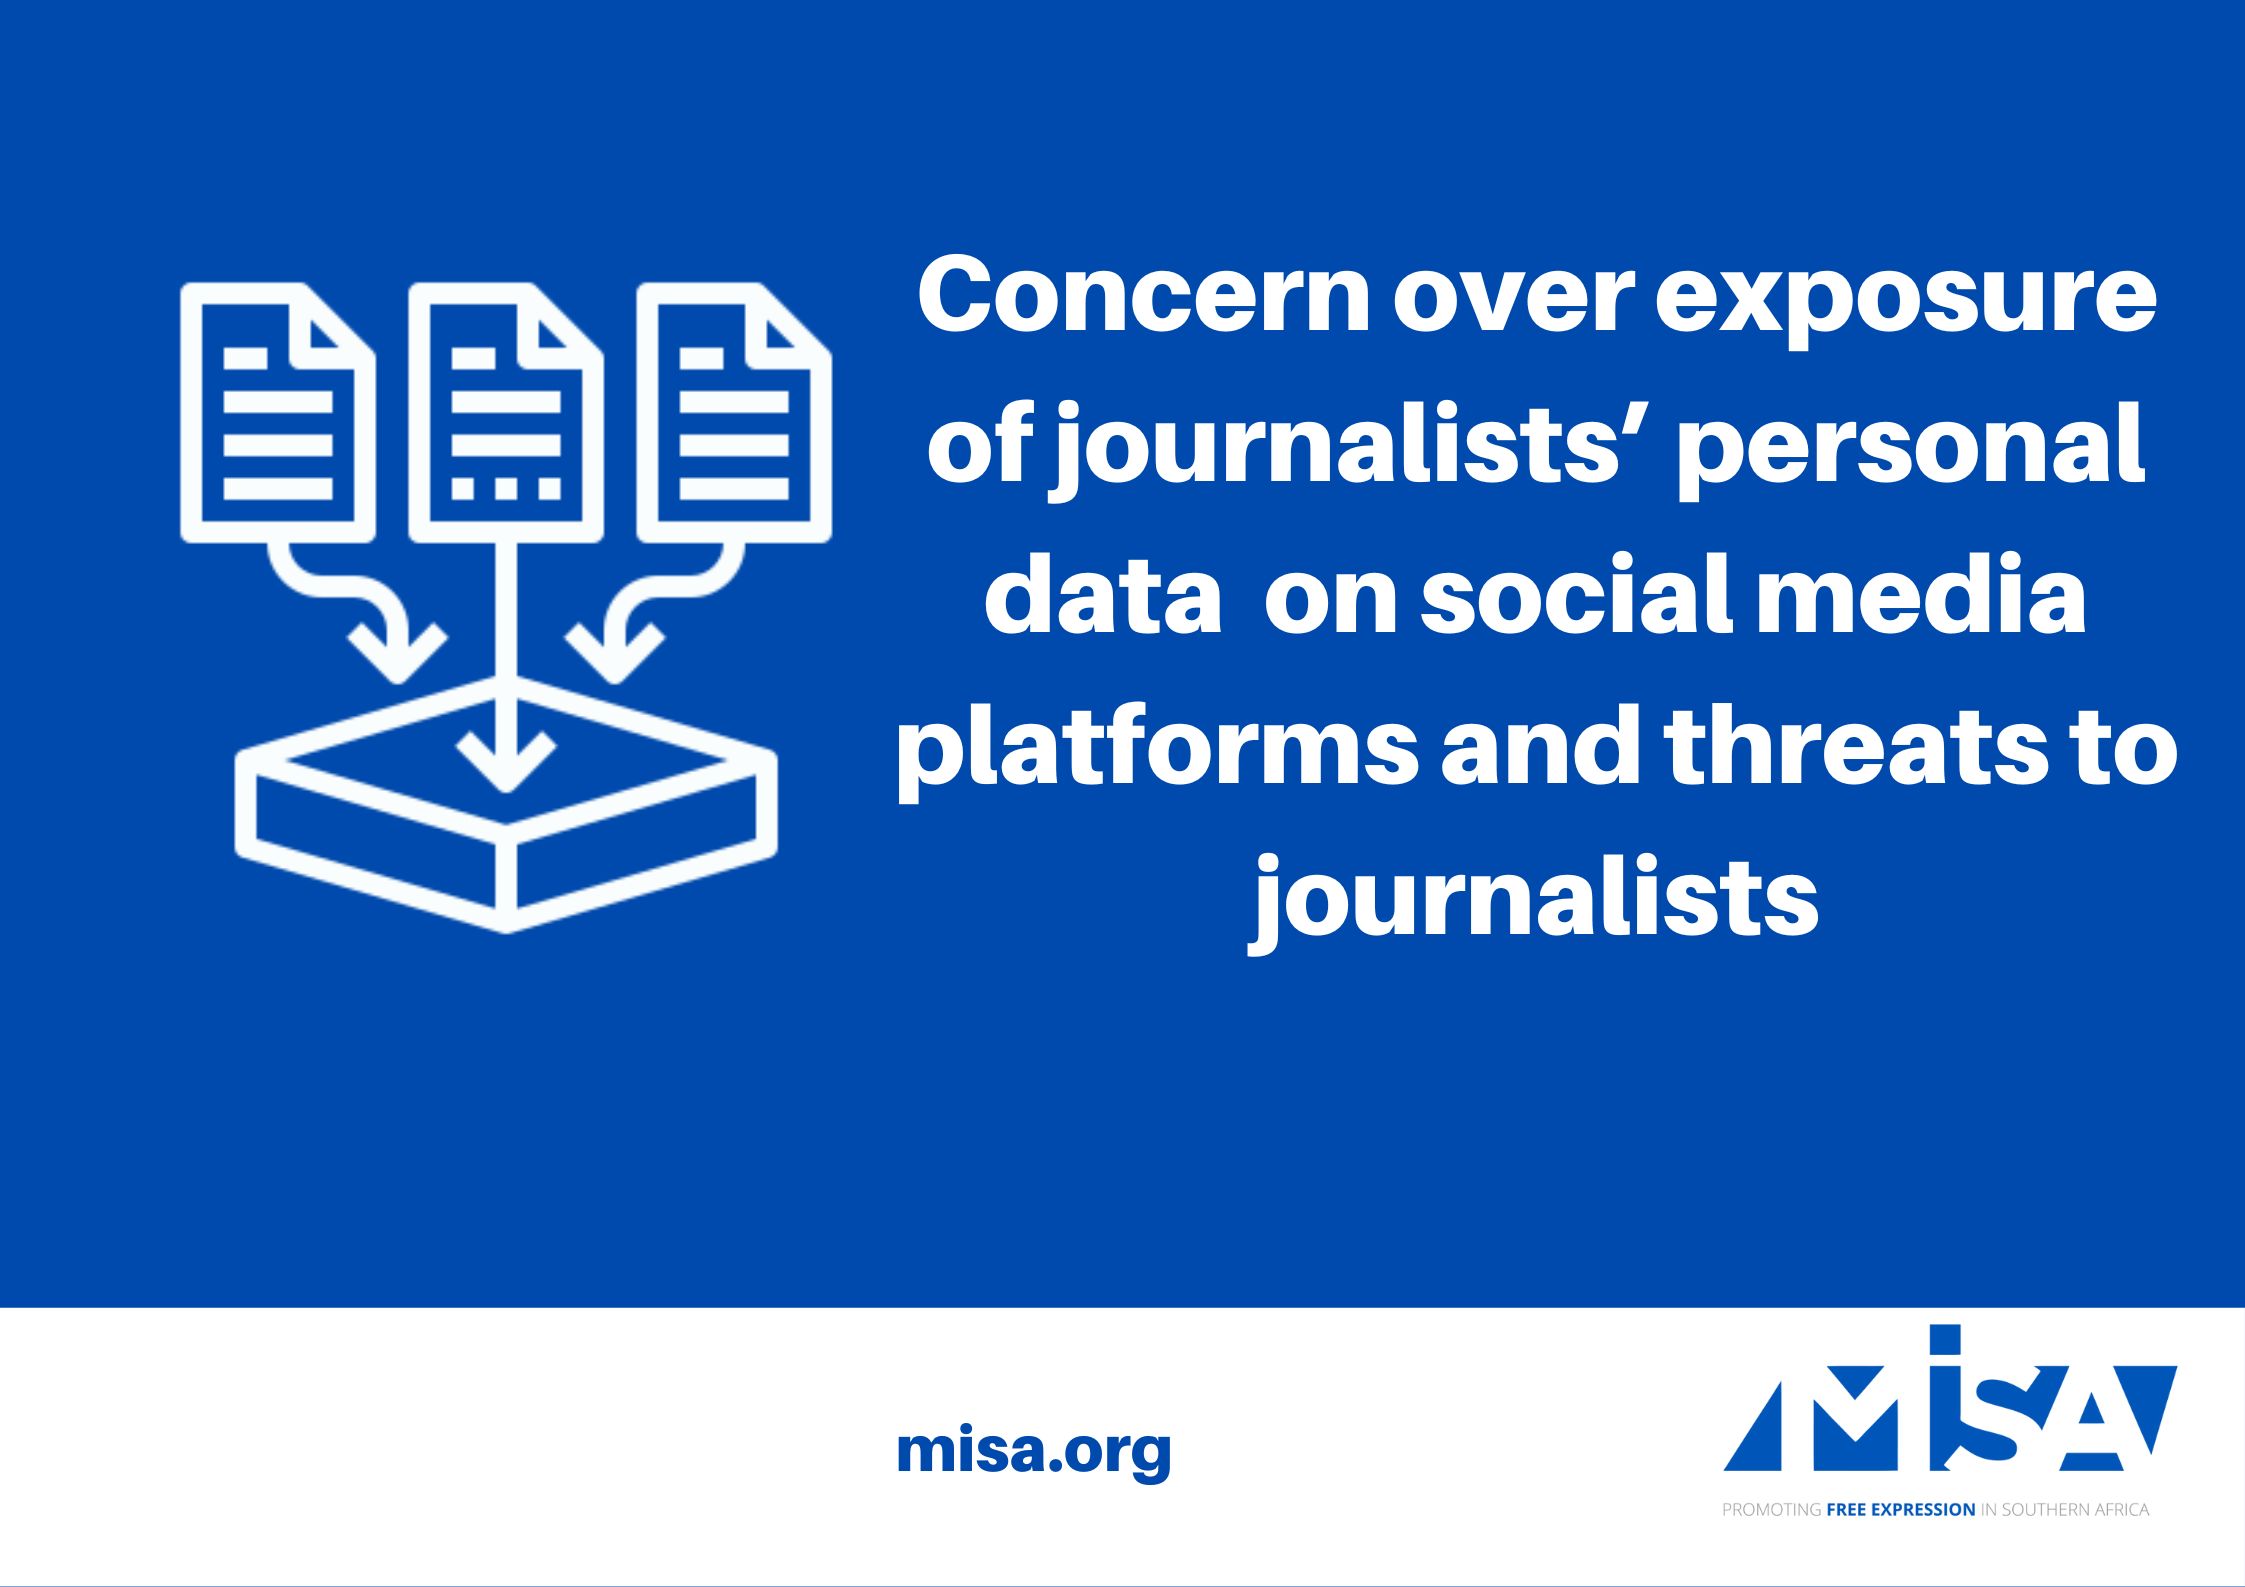 Concern over exposure of journalists’ personal data  on social media platforms and threats to journalists